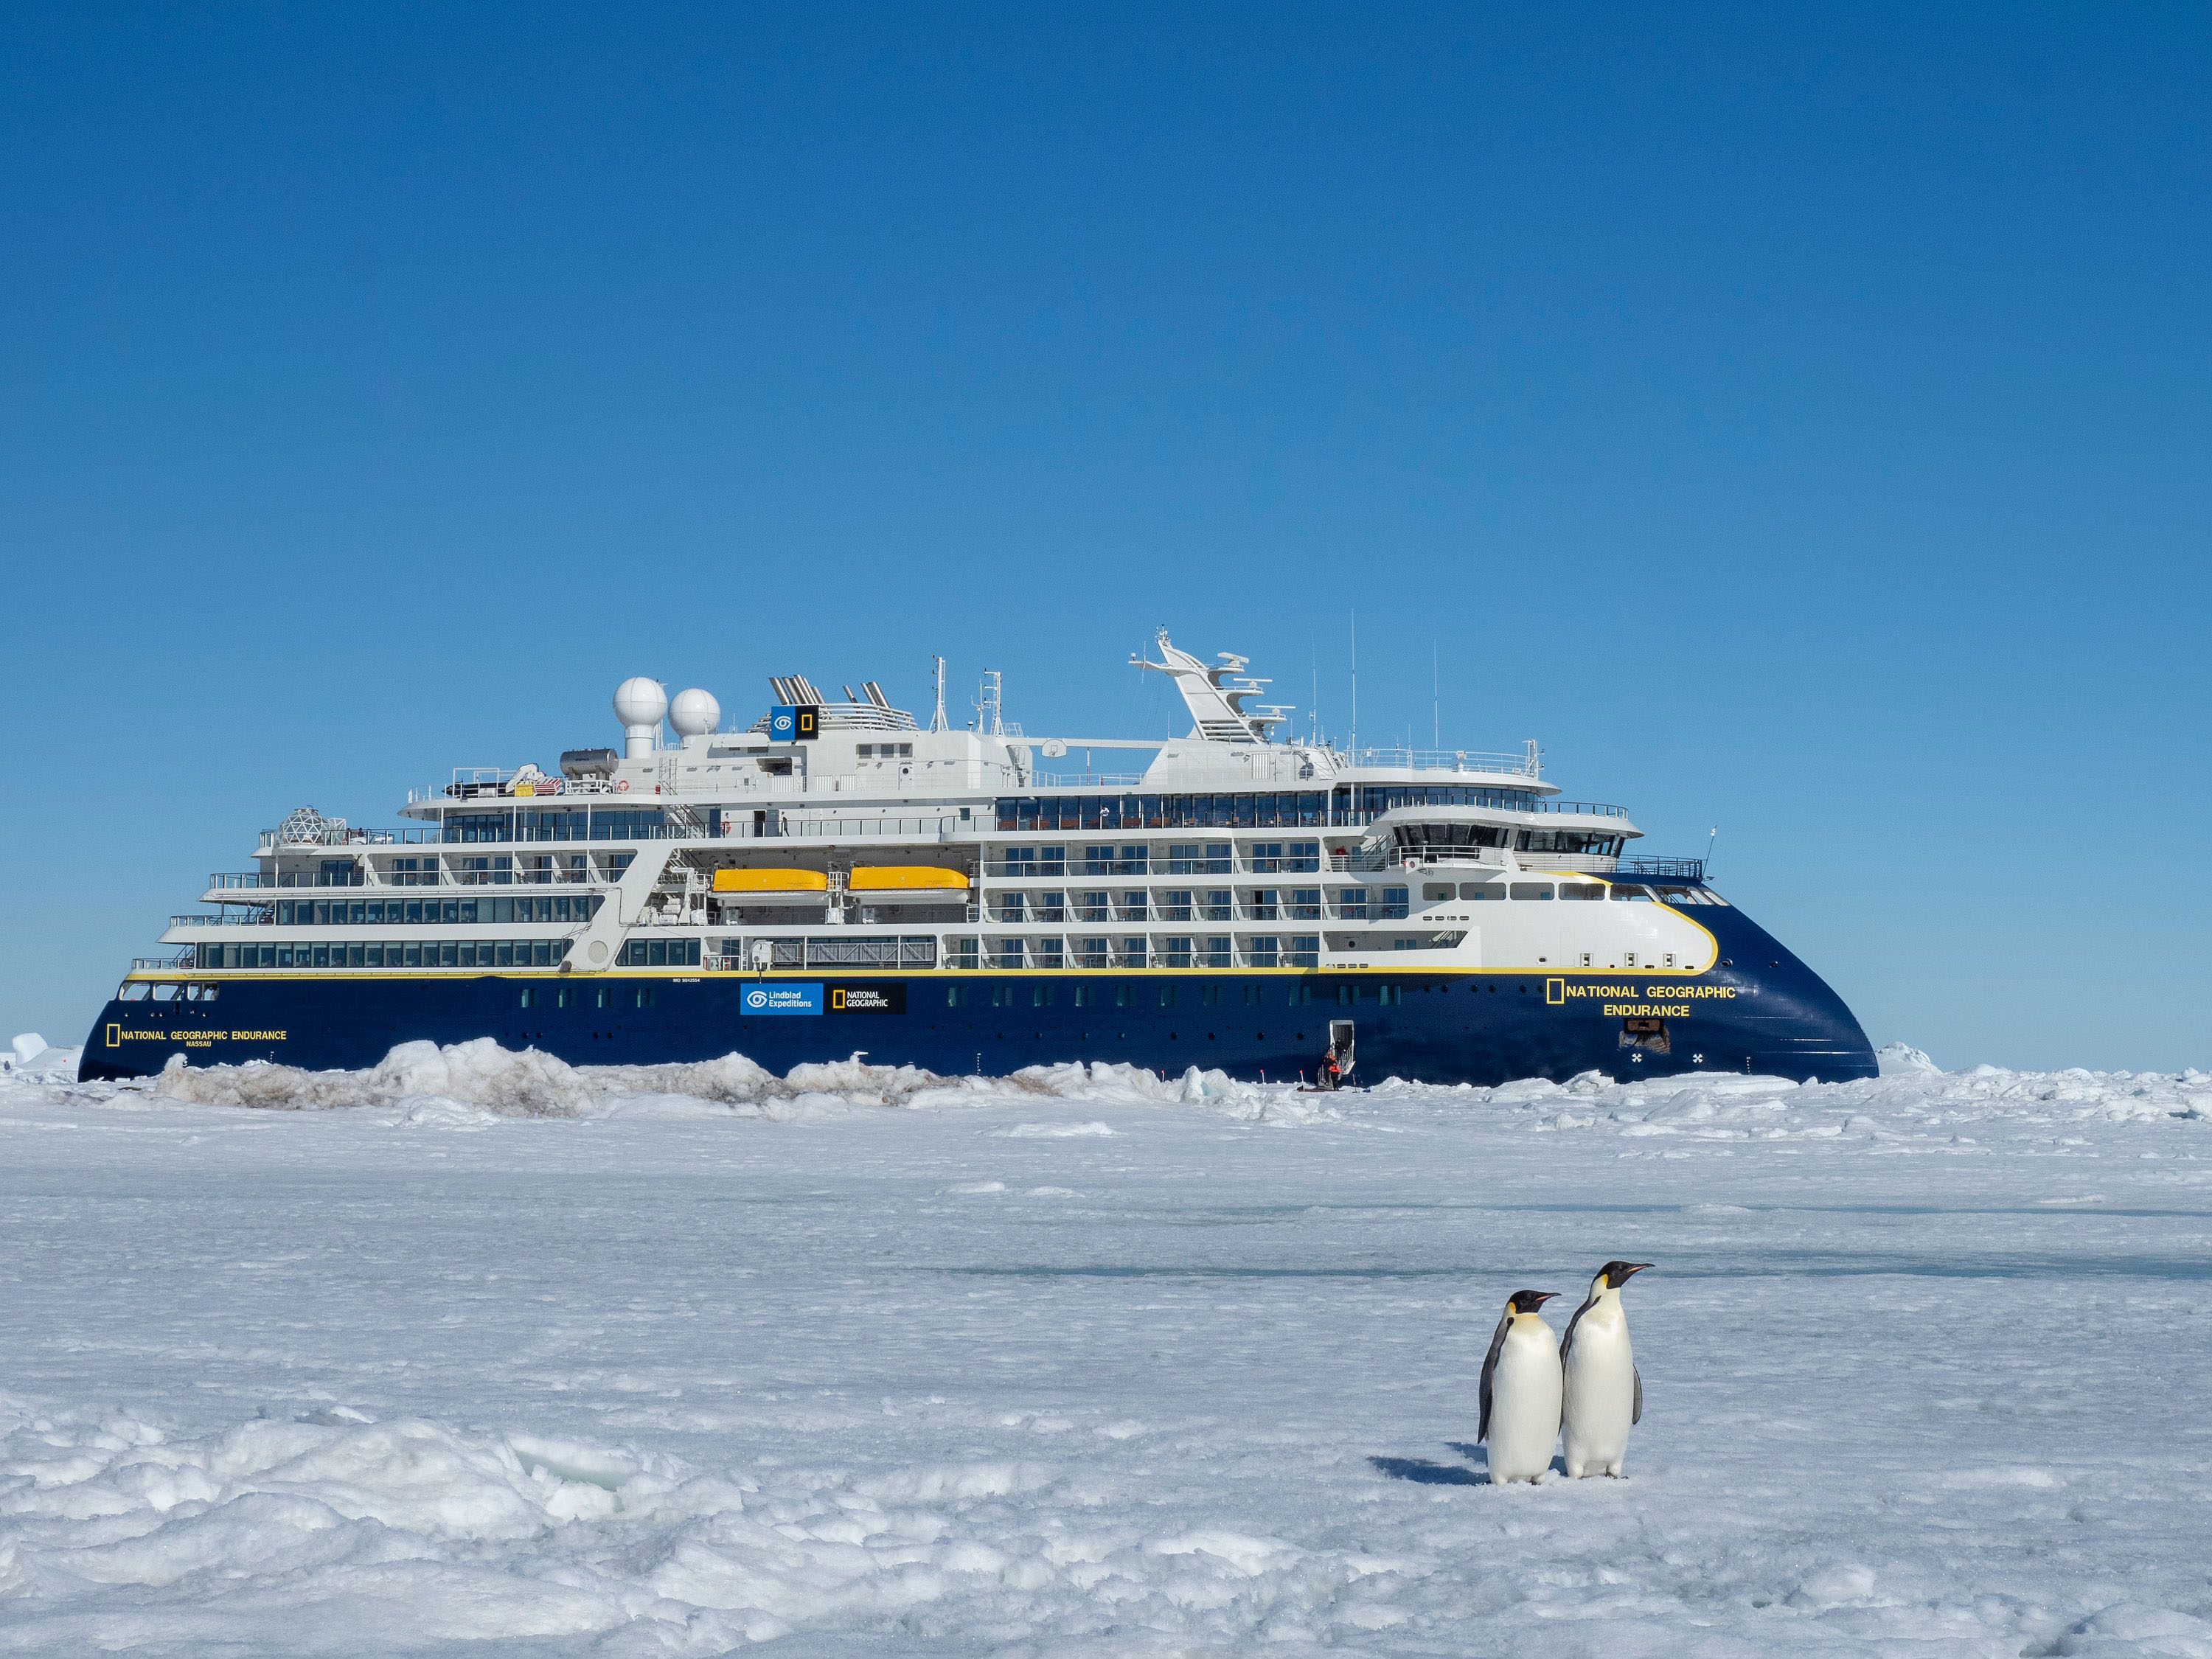 National Geographic Endurance ship parked in ice with penguins in the foreground